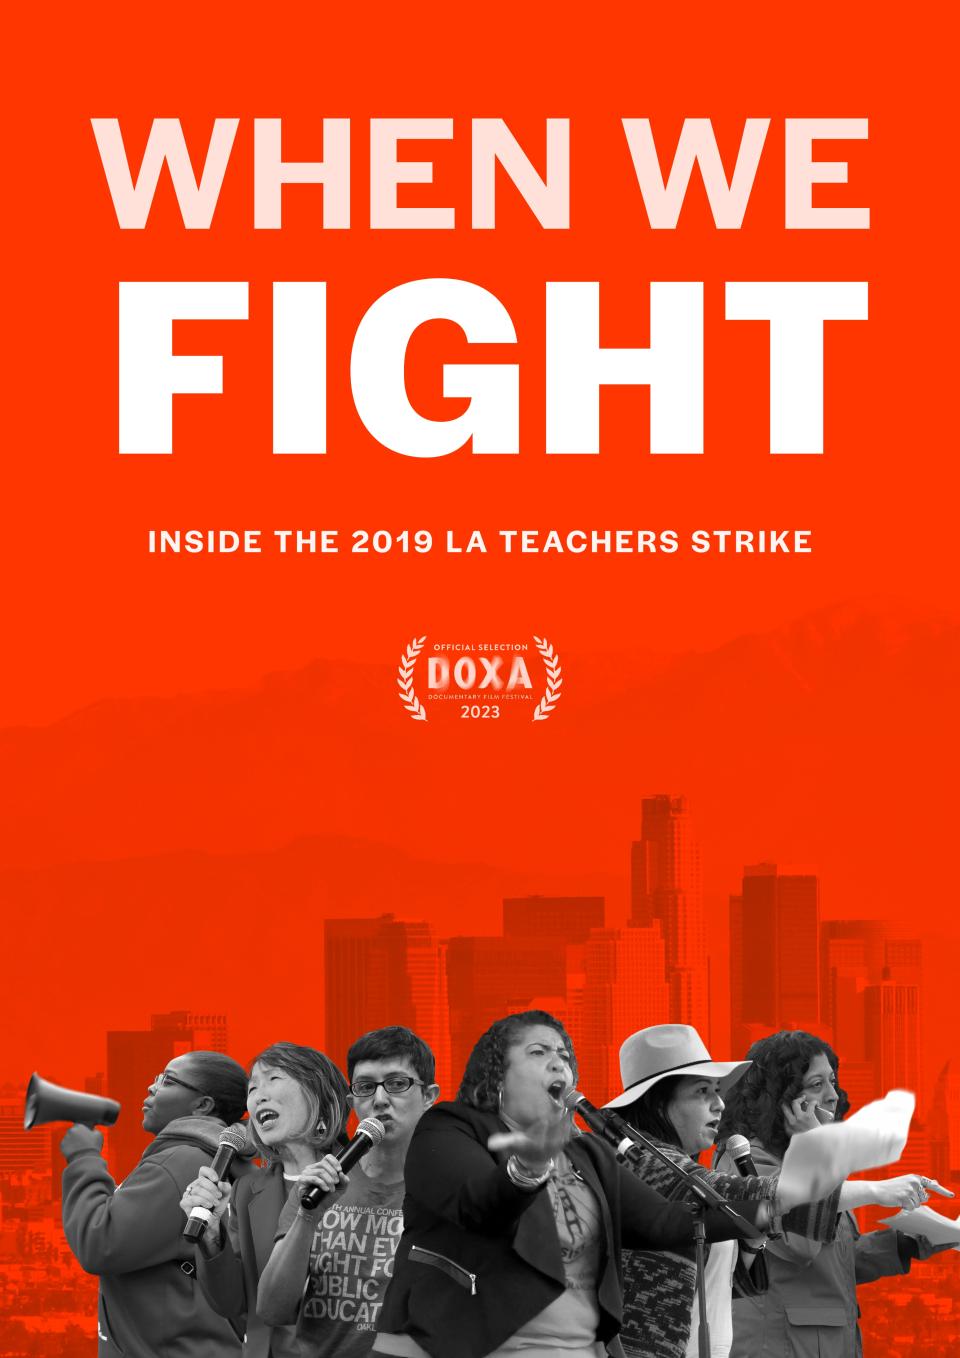 A red poster with large white font at the top "When We Fight: Inside the 2019 LA Teachers Strike" a Dox A film laurel sits below. At the bottom of the poster is a montage of people speaking out, in black and white, set atop a red faded city.